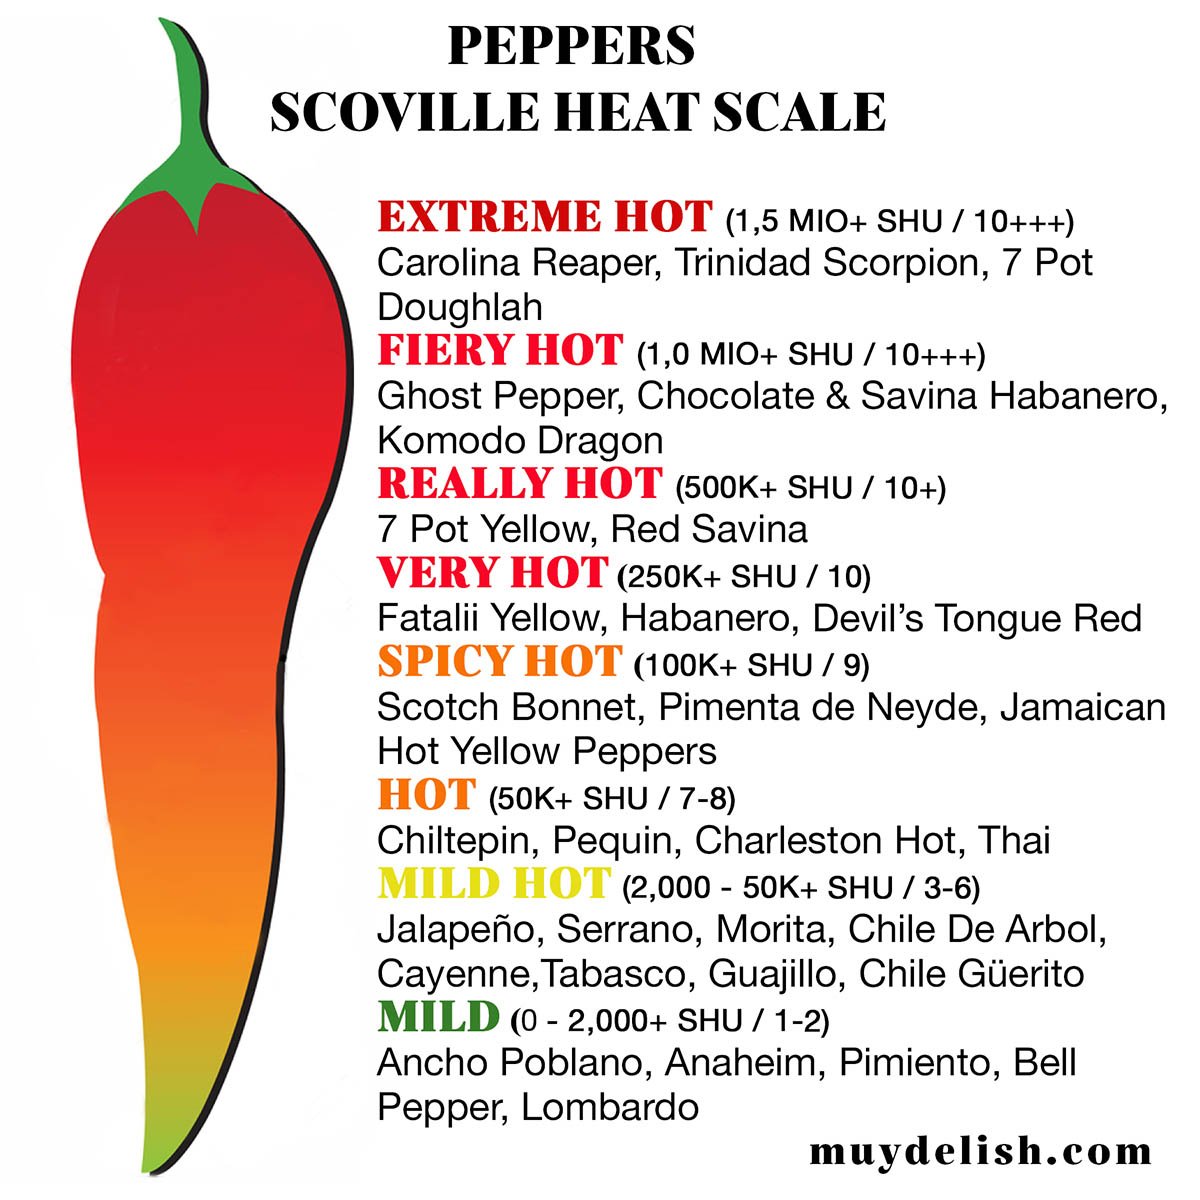 A graphic image of a pepper with different colors and words describing different levels of heat.